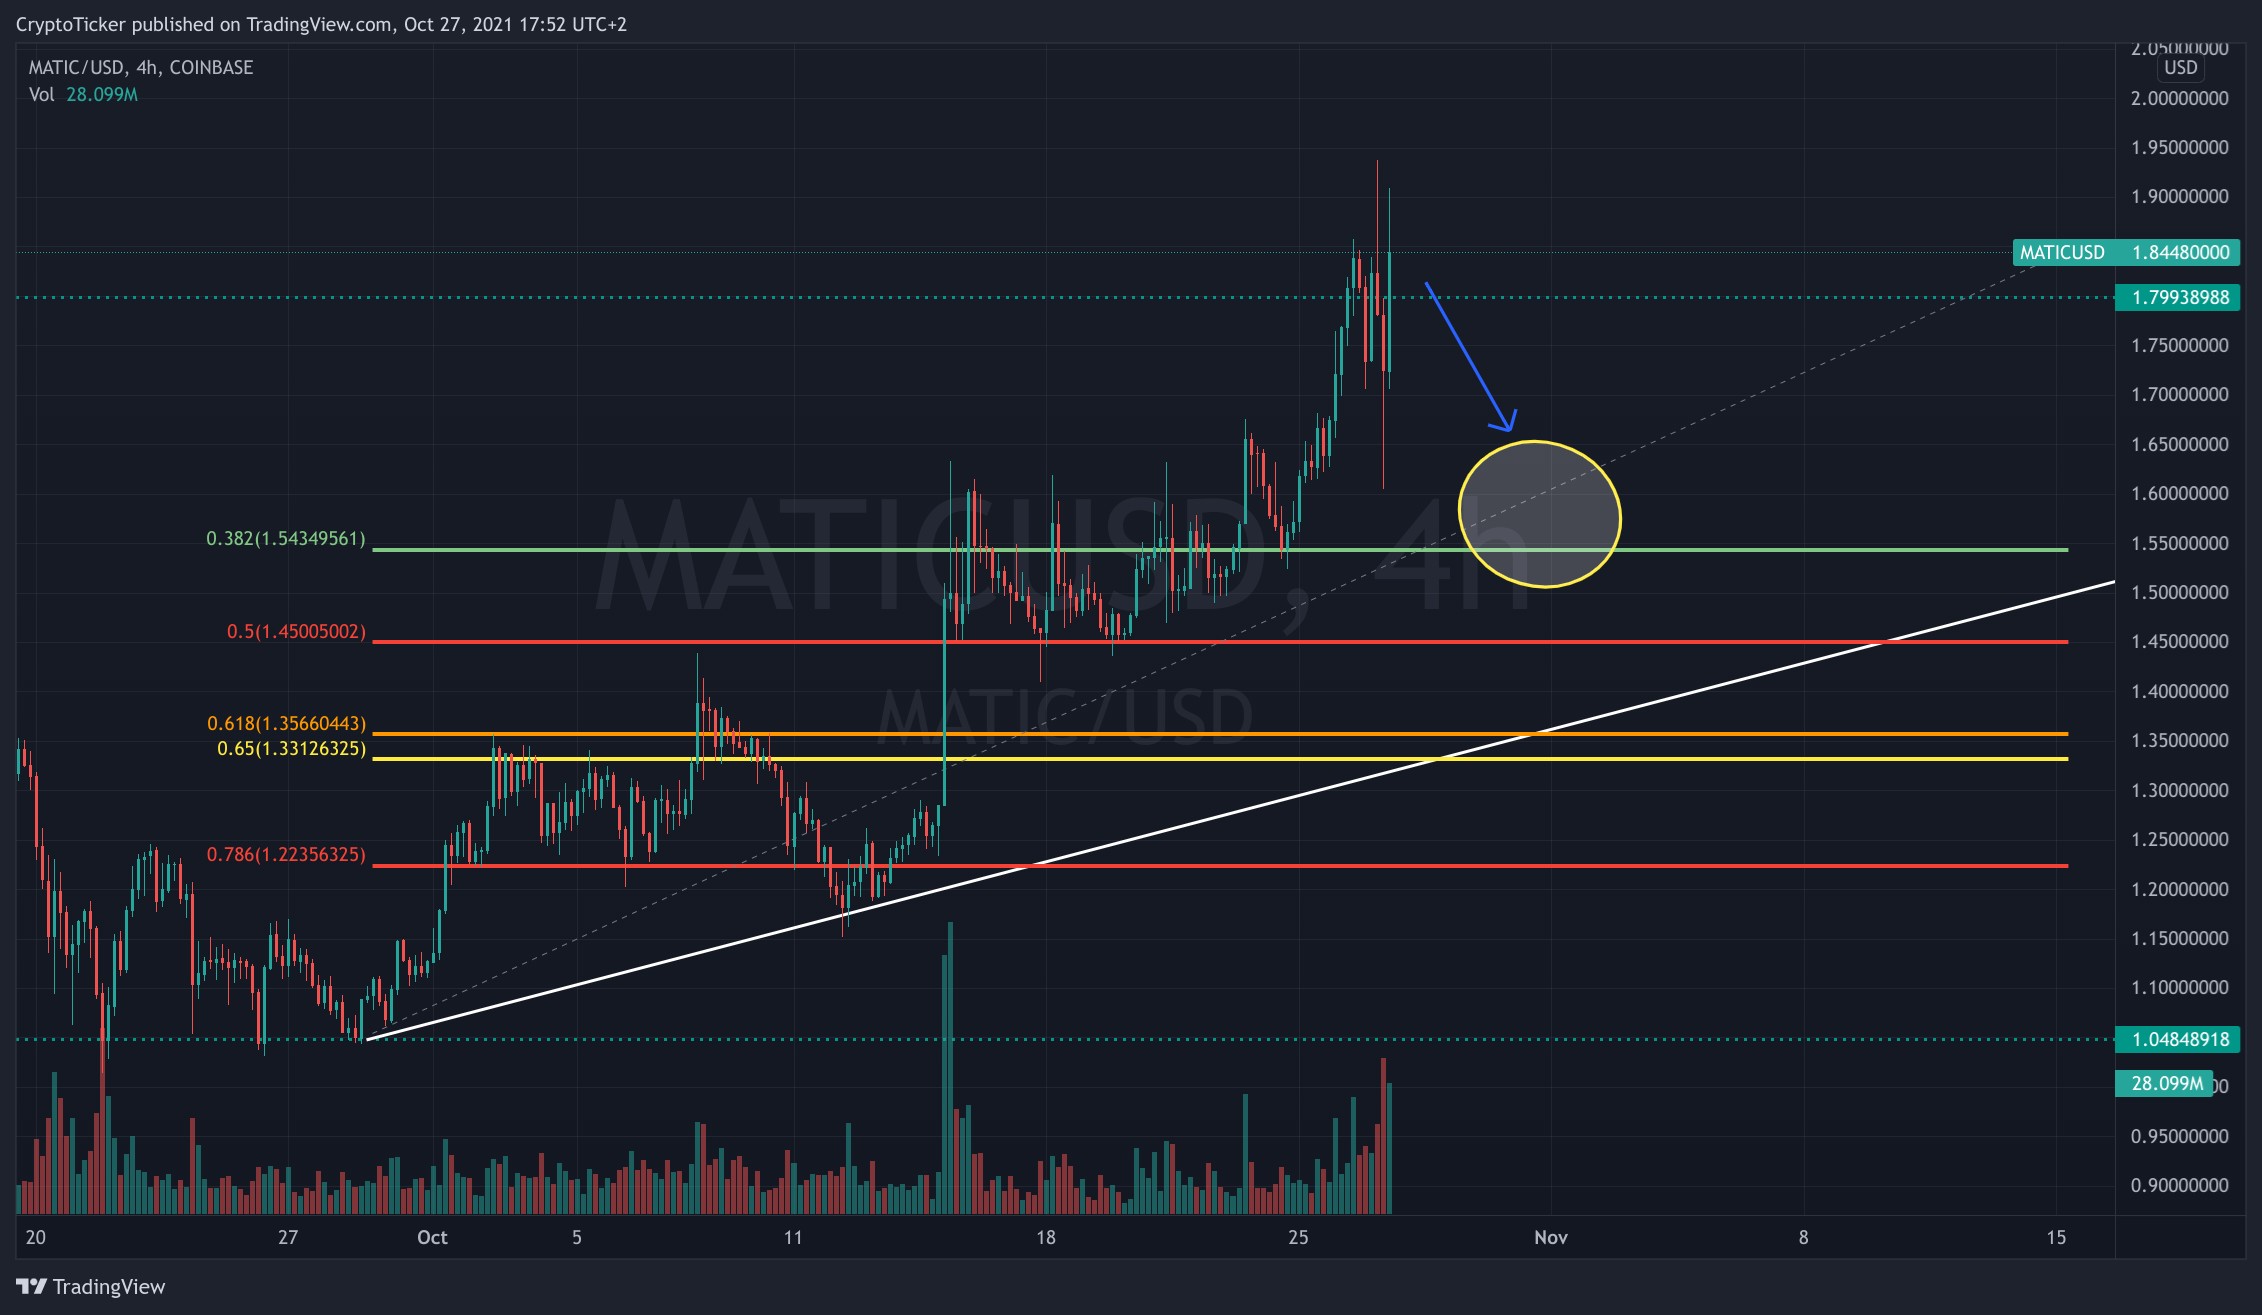 MATIC/USD 4-hours chart showing a potential retracement for MATIC